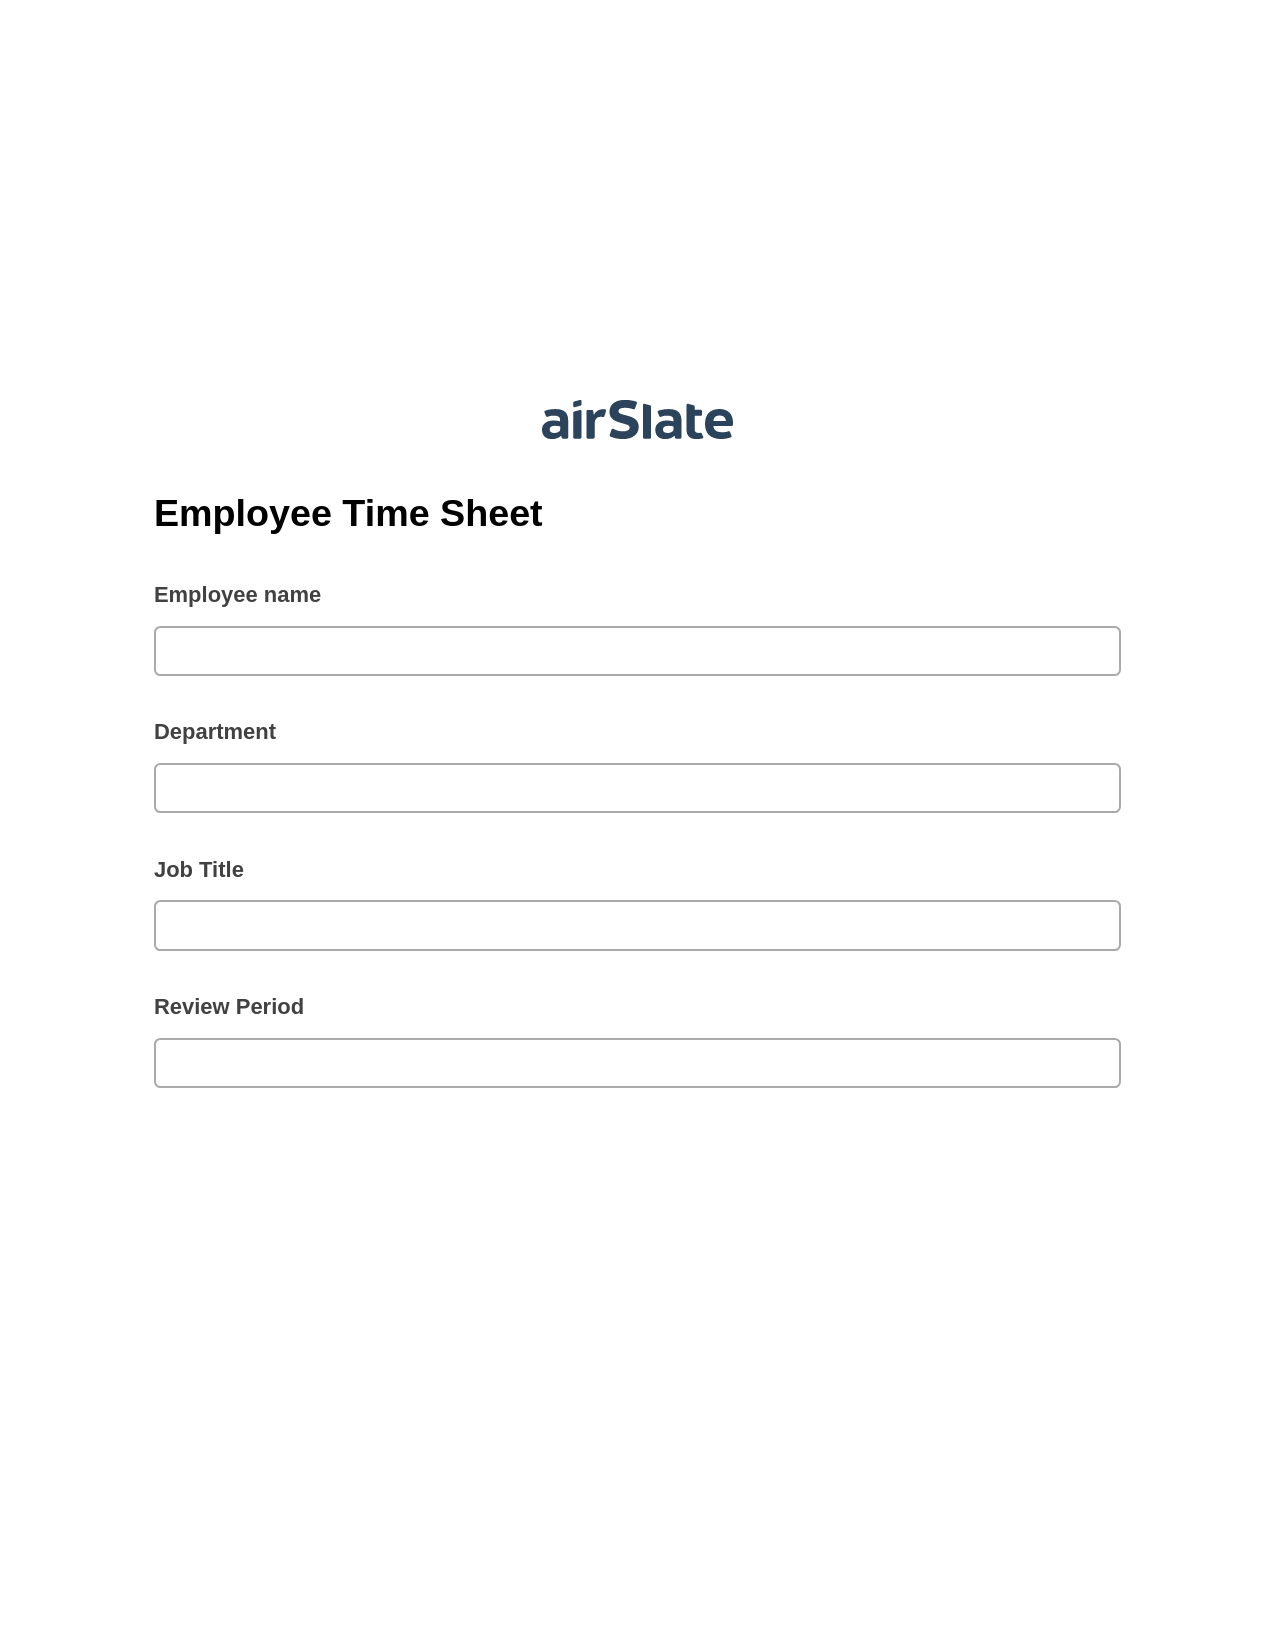 Employee Time Sheet Pre-fill Document Bot, Update Audit Trail Bot, Archive to OneDrive Bot